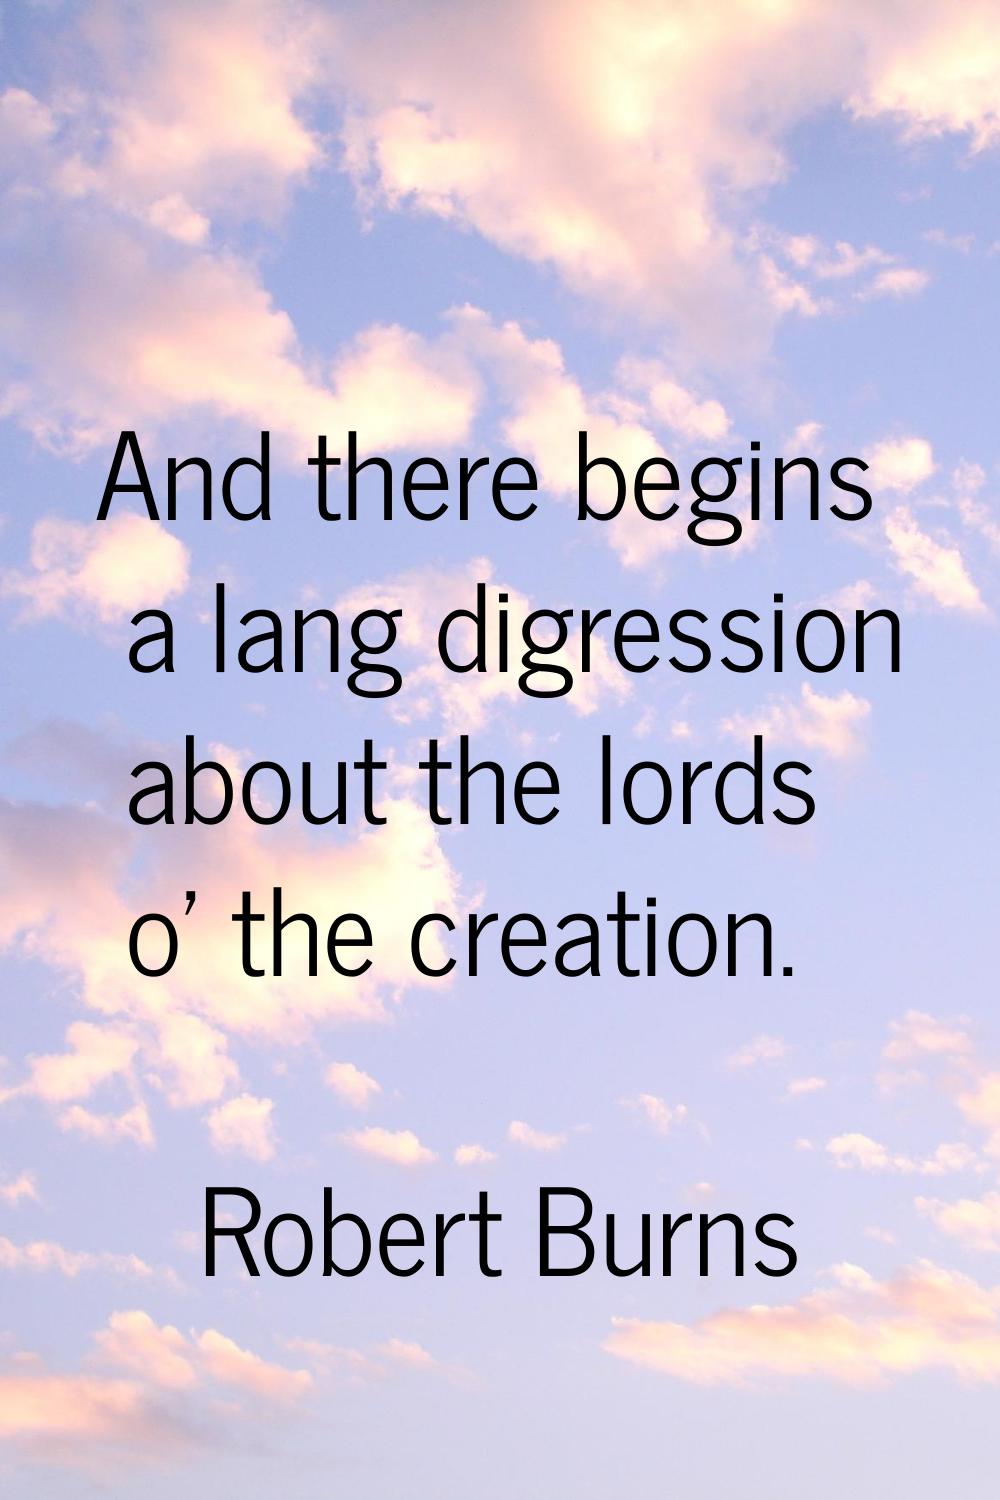 And there begins a lang digression about the lords o' the creation.